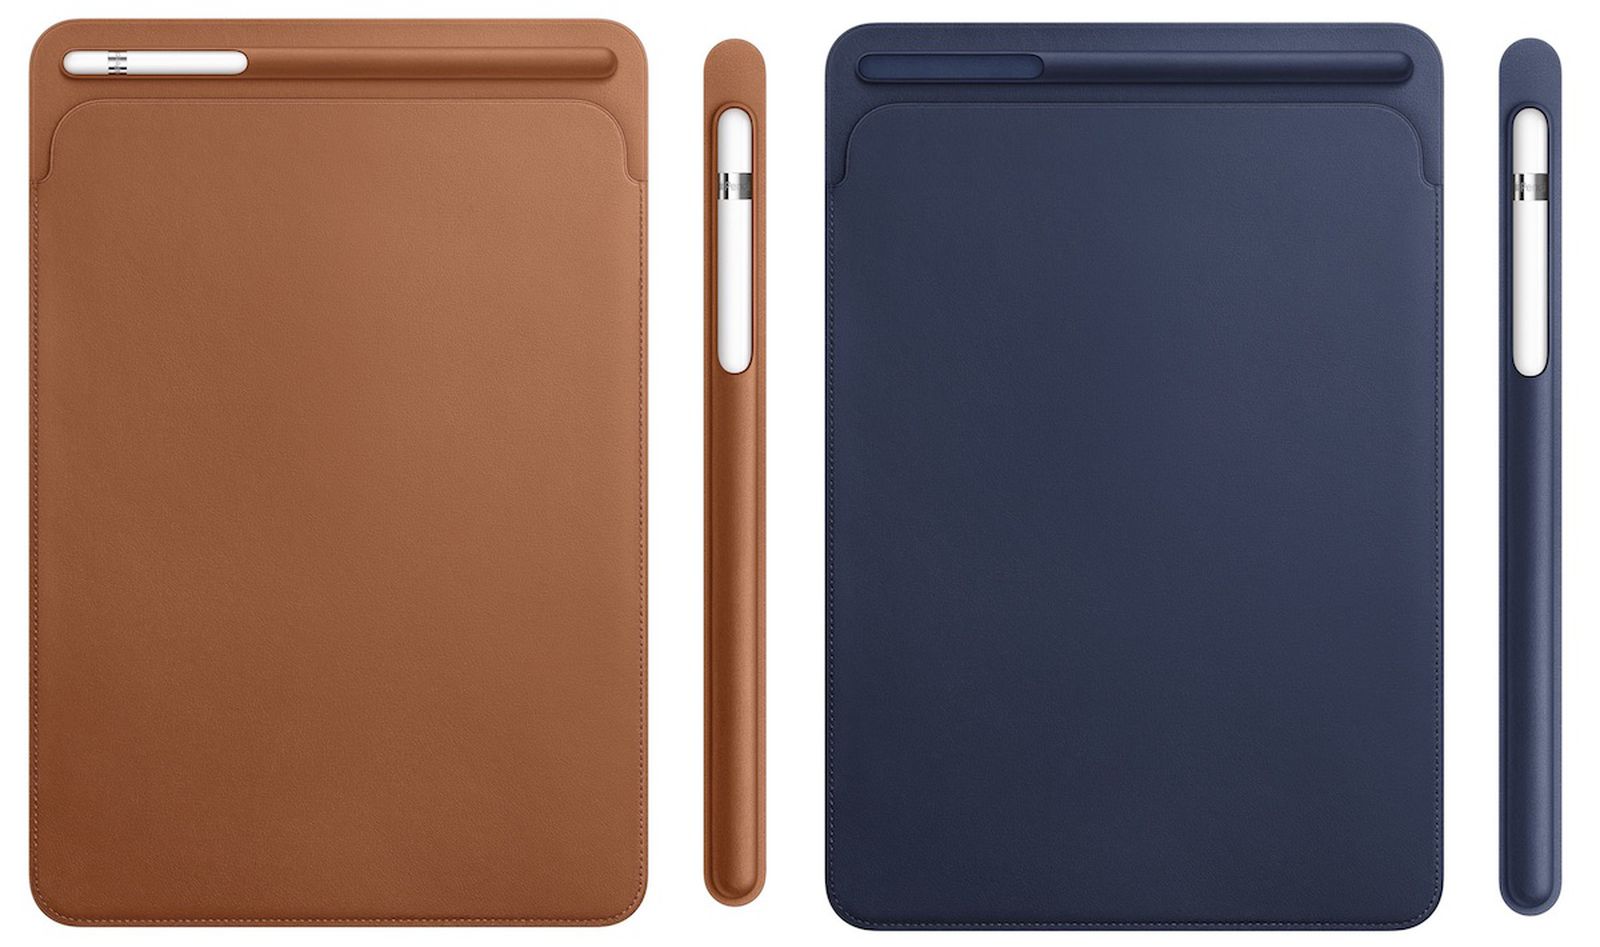 Tag det op leje biograf 10.5-Inch and 12.9-Inch iPad Pro Models Gain All-New Leather Sleeve and  Apple Pencil Case Accessories - MacRumors